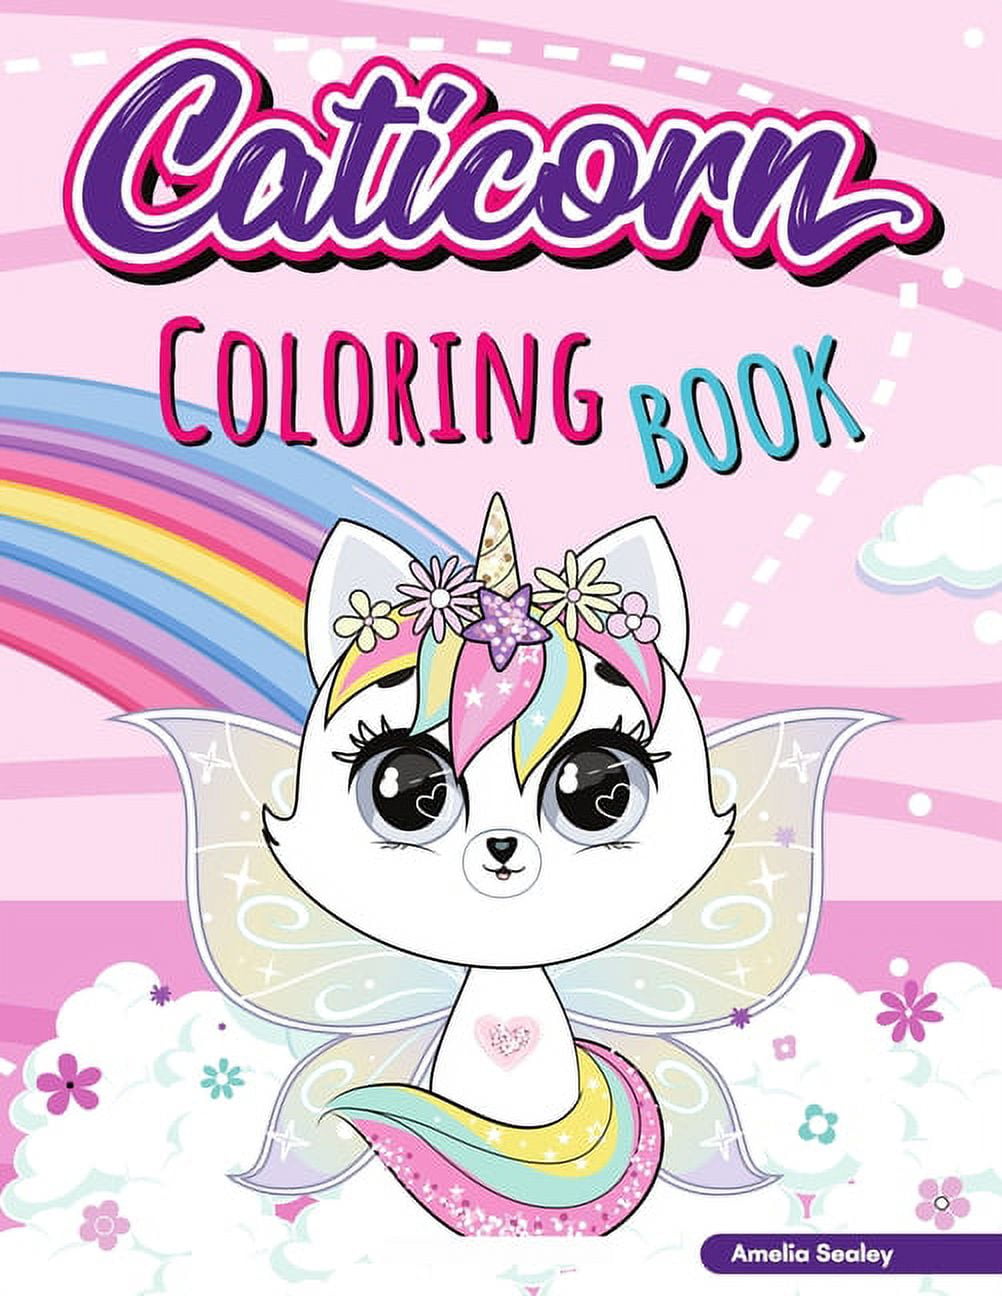 Cat unicon coloring book for kids adorable cat unicorn coloring book for girls ages